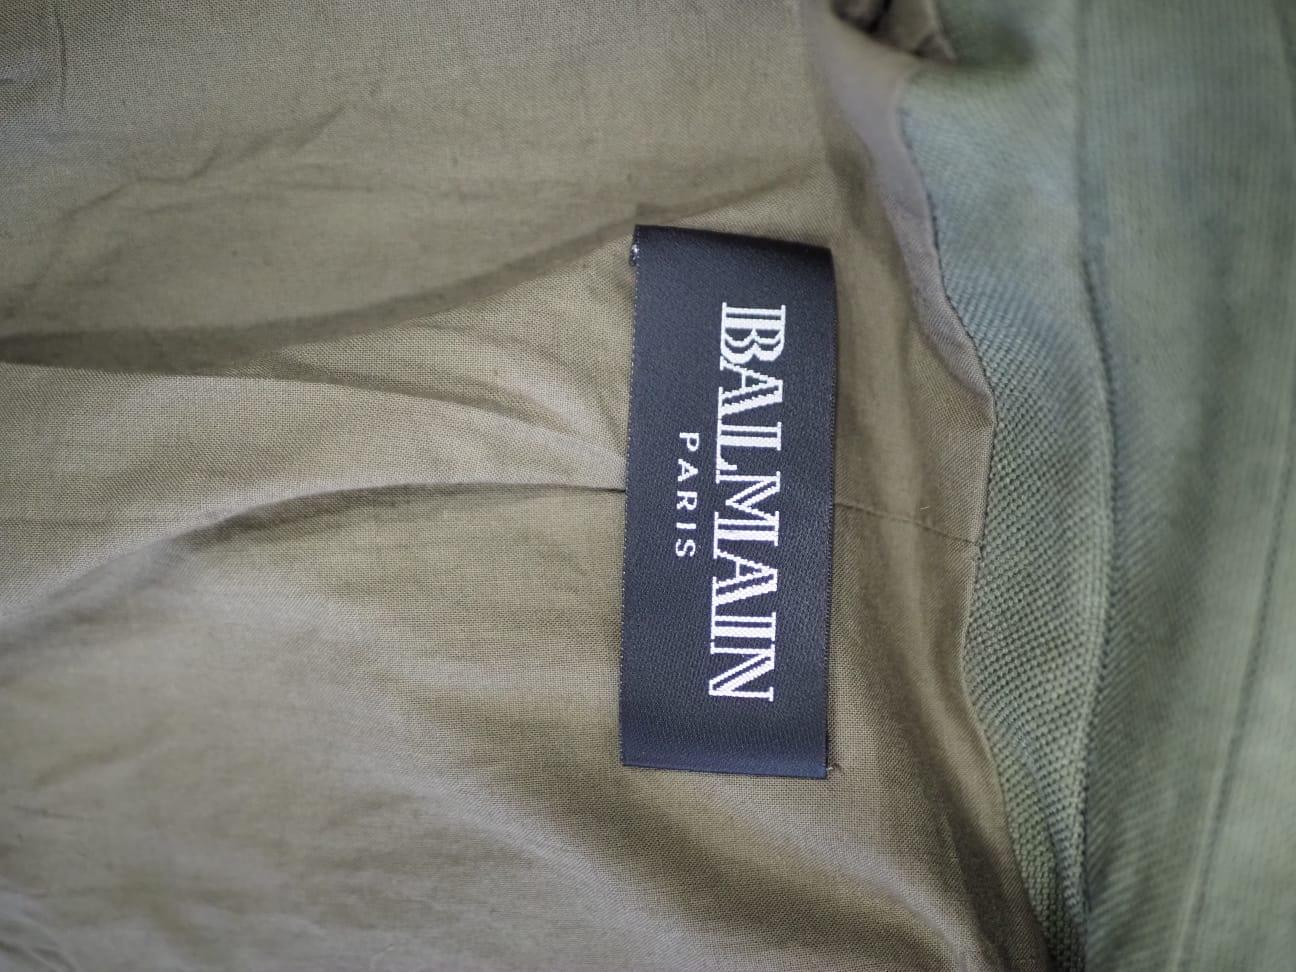 Balmain military green cotton jacket
Embellished with green pattern and silver tone hardware
Totally made in France in size 36